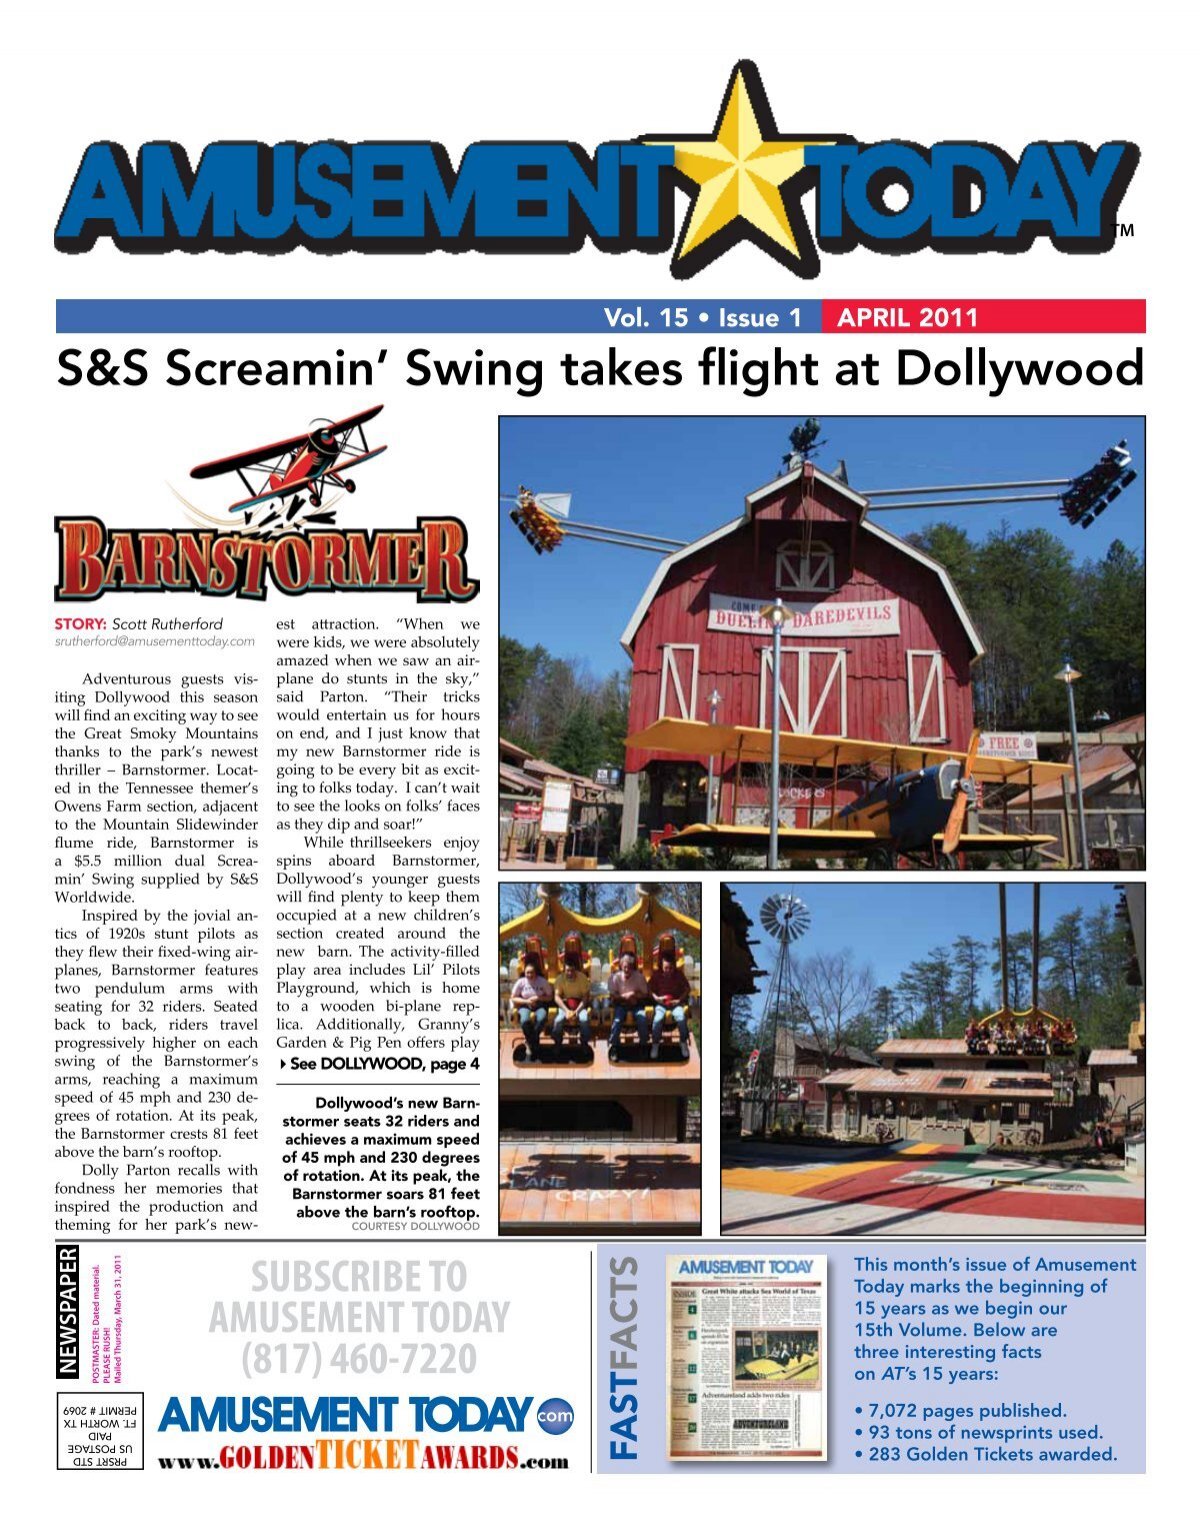 S&S Screamin' Swing takes flight at Dollywood - Amusement Today